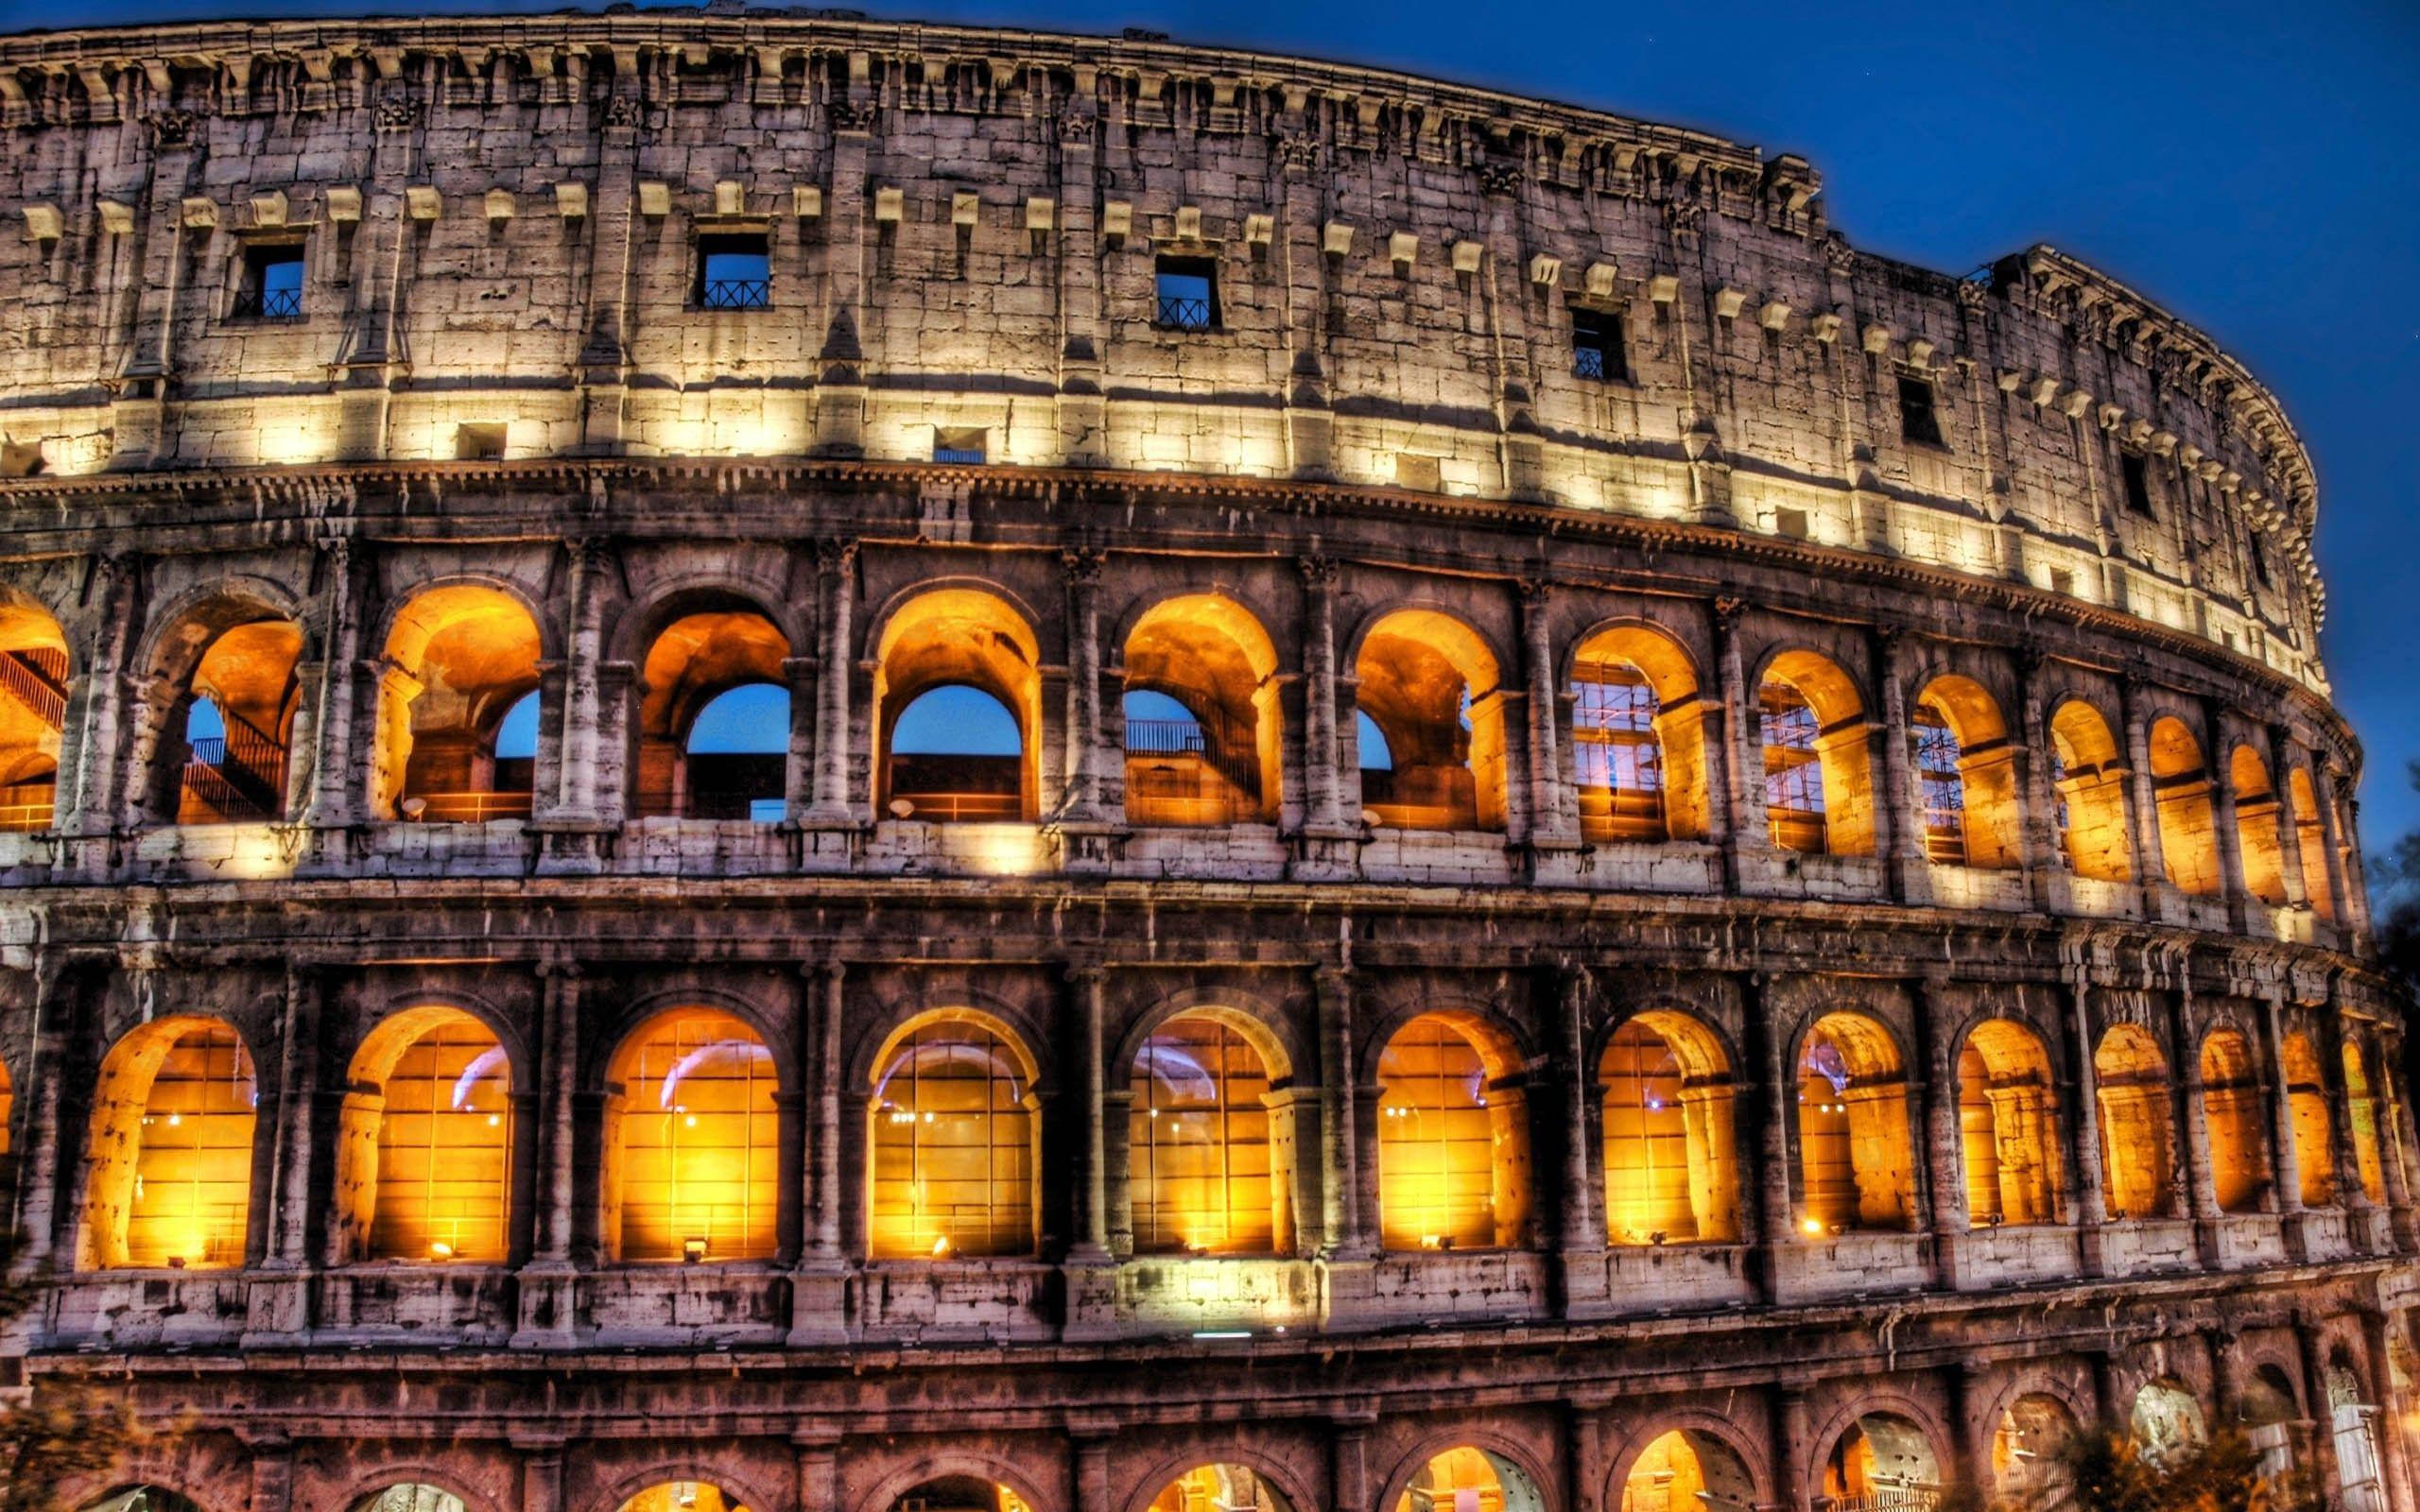 Italy full hd, hdtv, fhd, 1080p wallpapers hd, desktop backgrounds  1920x1080, images and pictures